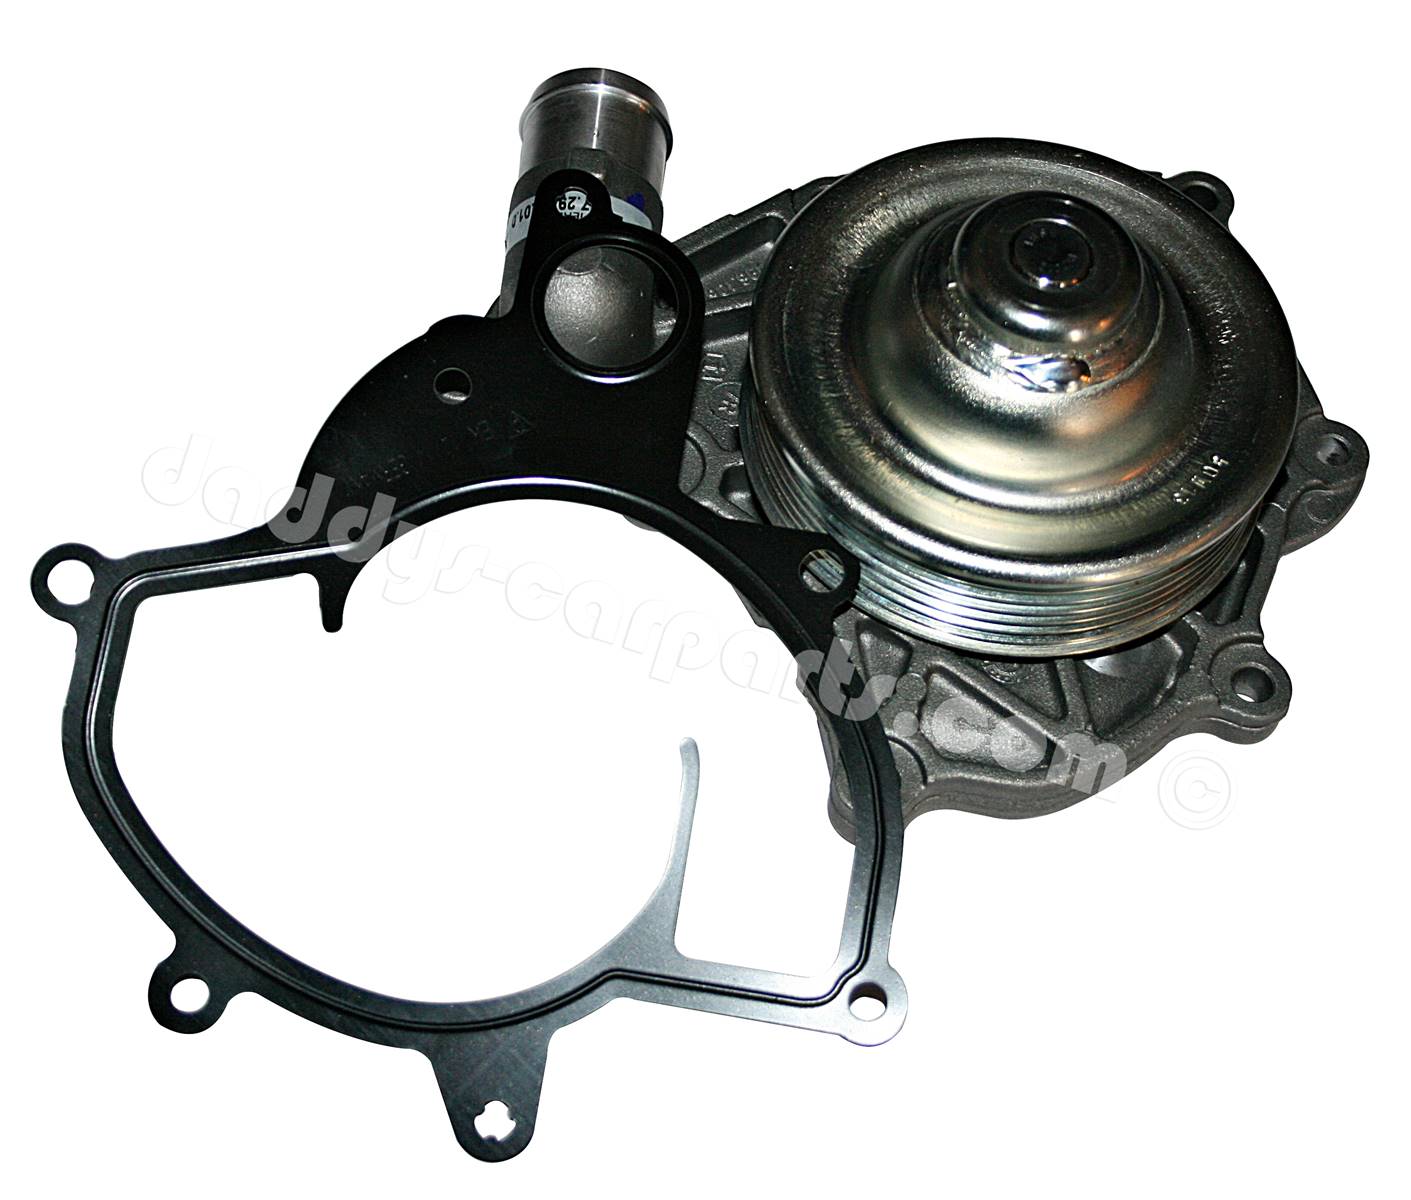 WATER PUMP / SEAL FOR 997 TURBO GT2 GT3